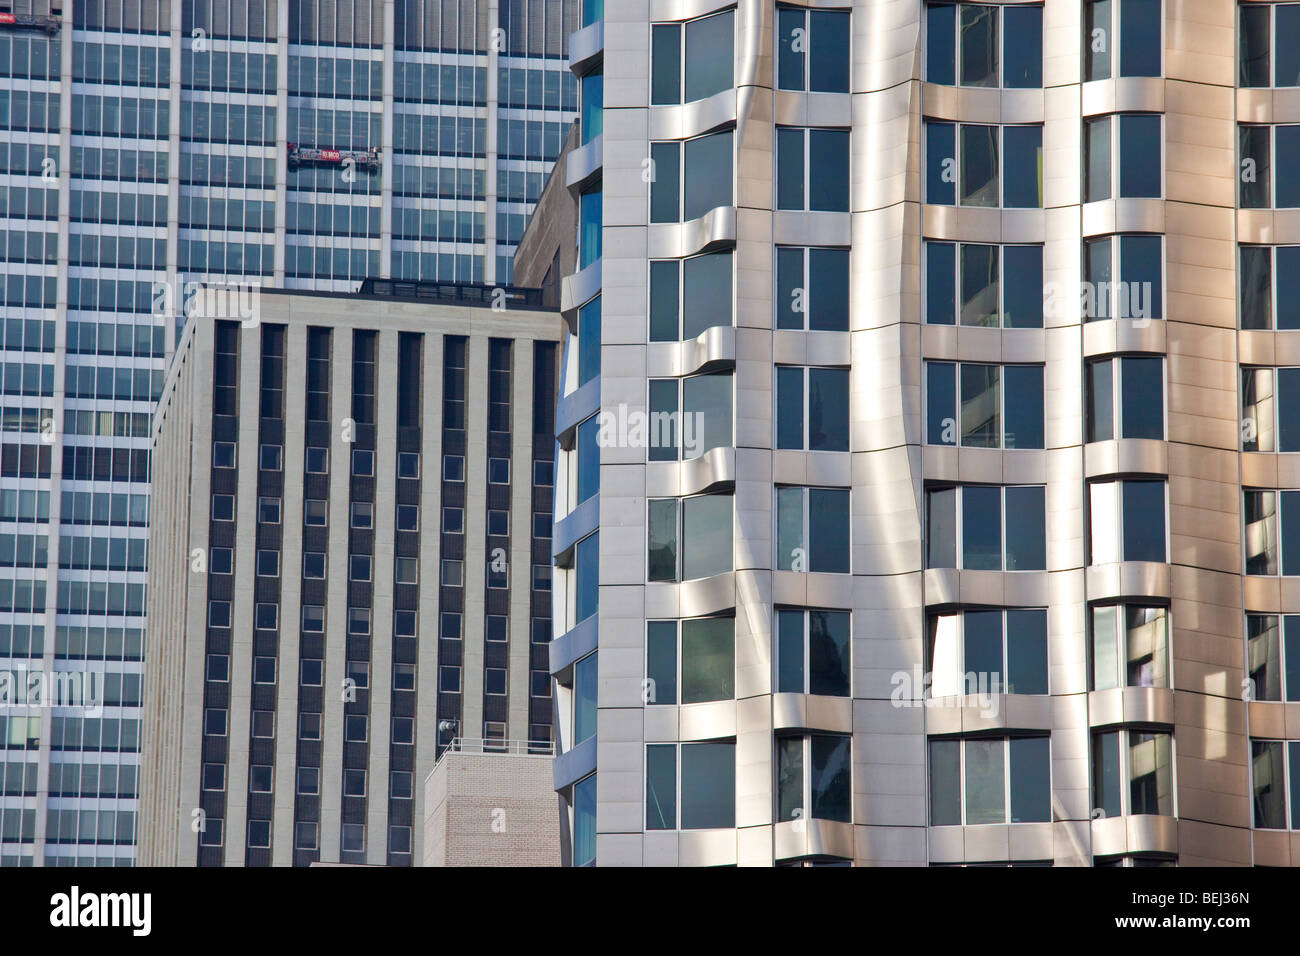 Beekman Tower Frank Gehry Apartment Building in Manhattan New York City Stock Photo